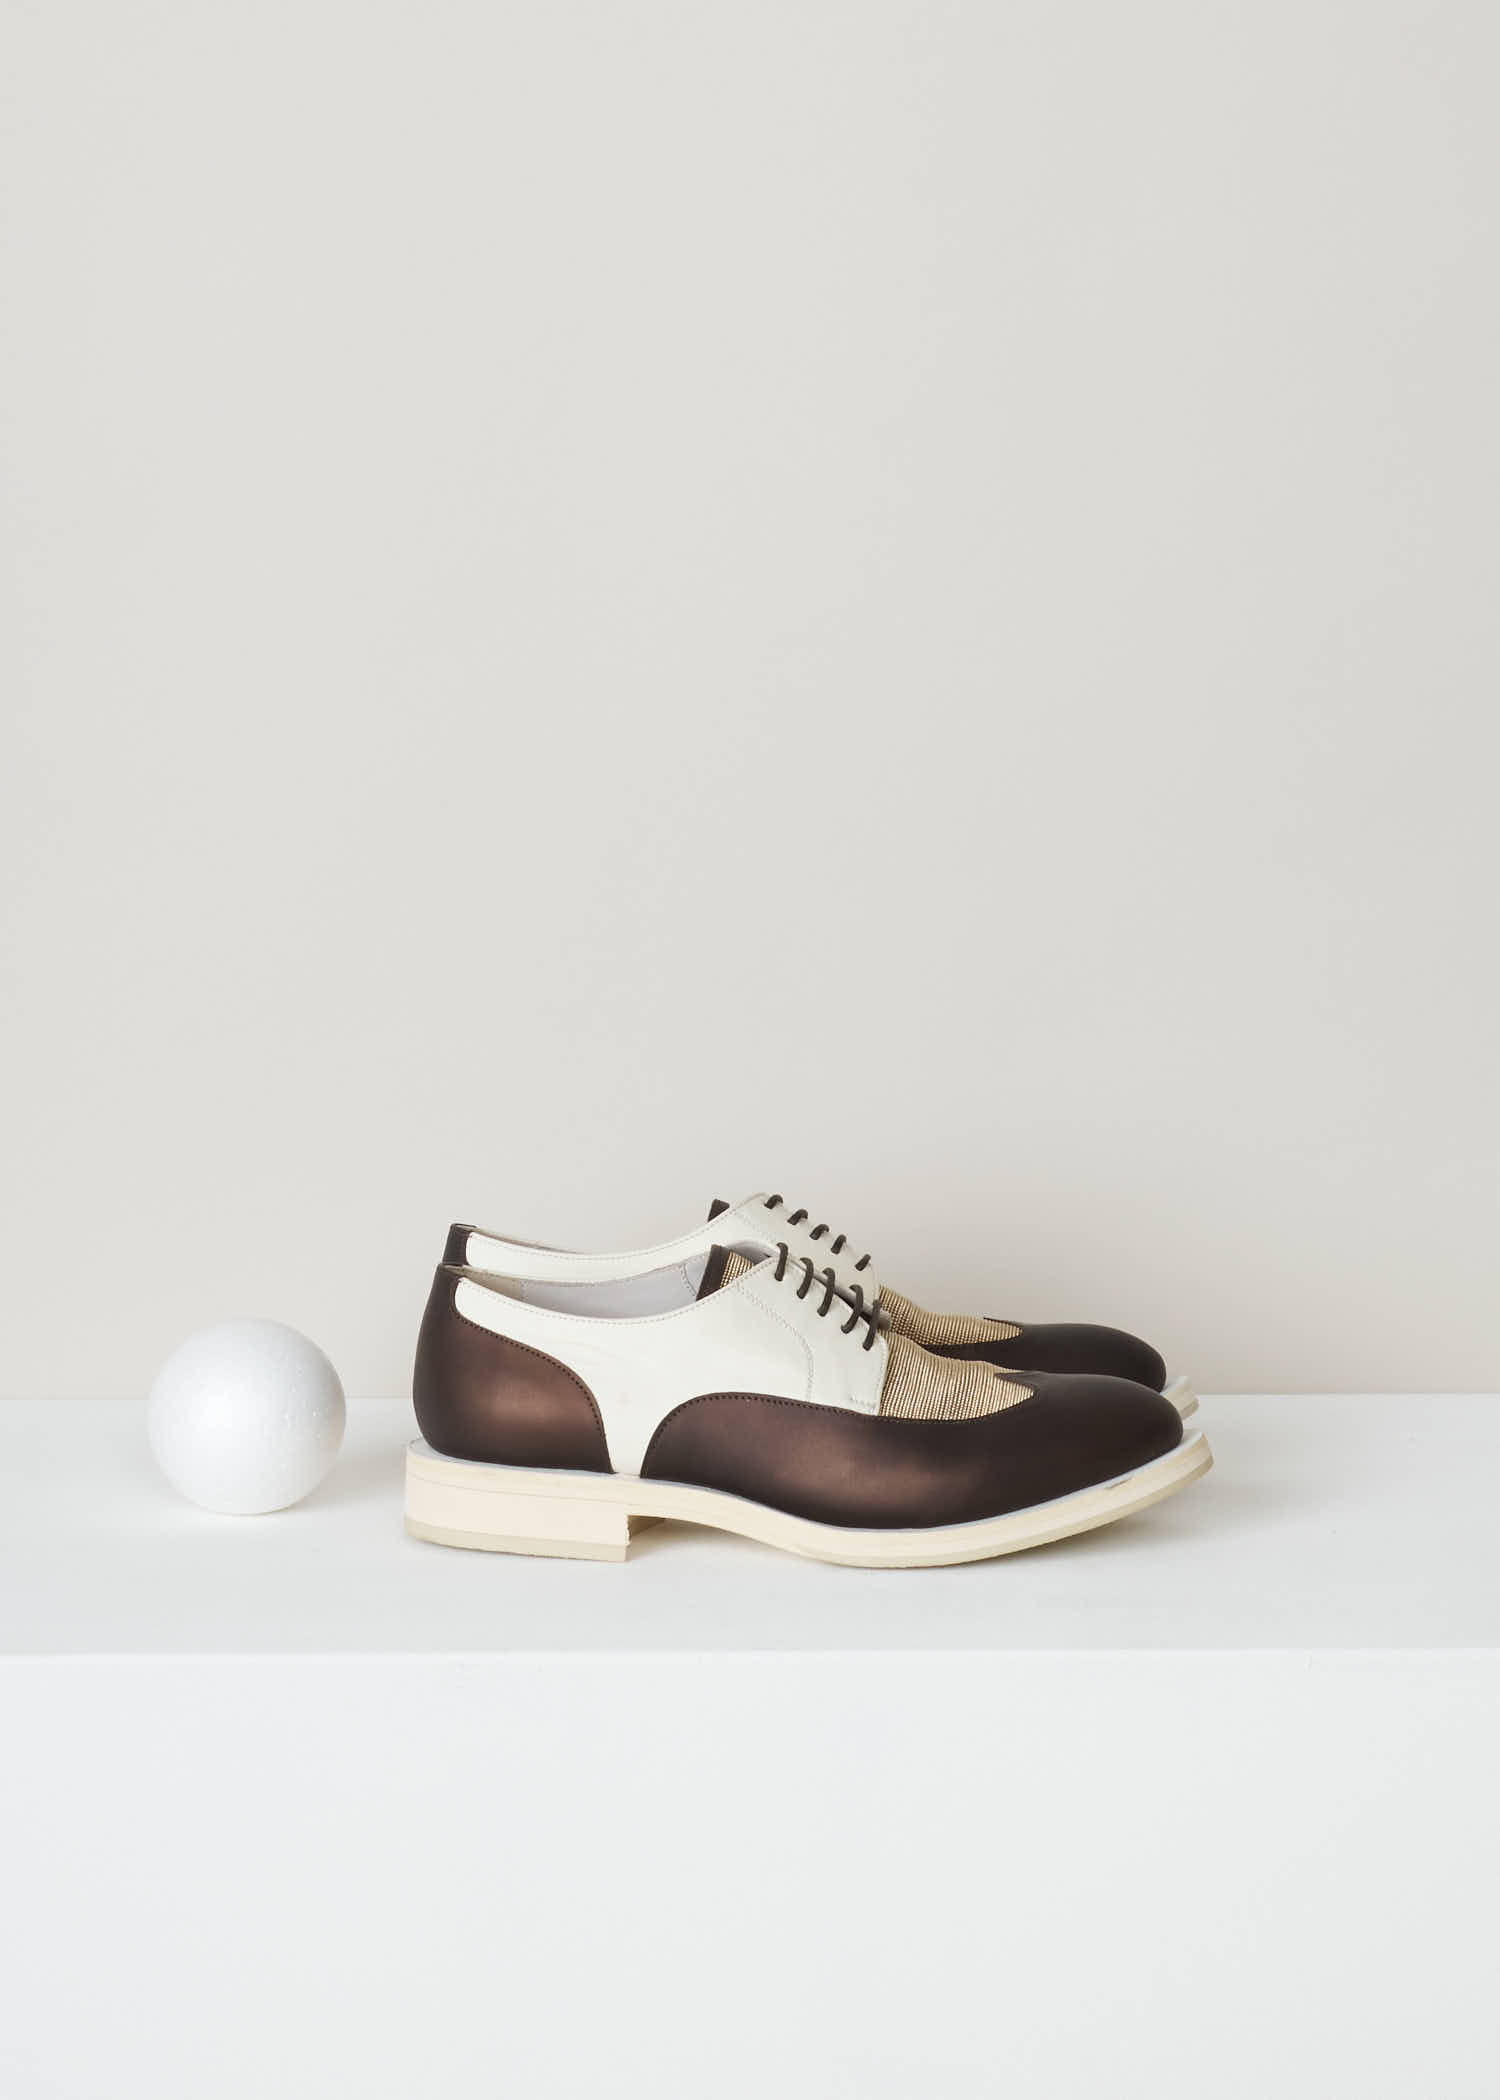 Brunello Cucinelli Leather lace-up shoes MZDRDG402_CC958 brown side. White and metallic brown leather derby shoe, with ultra-lightweight rubber sole and gold decorative beading.